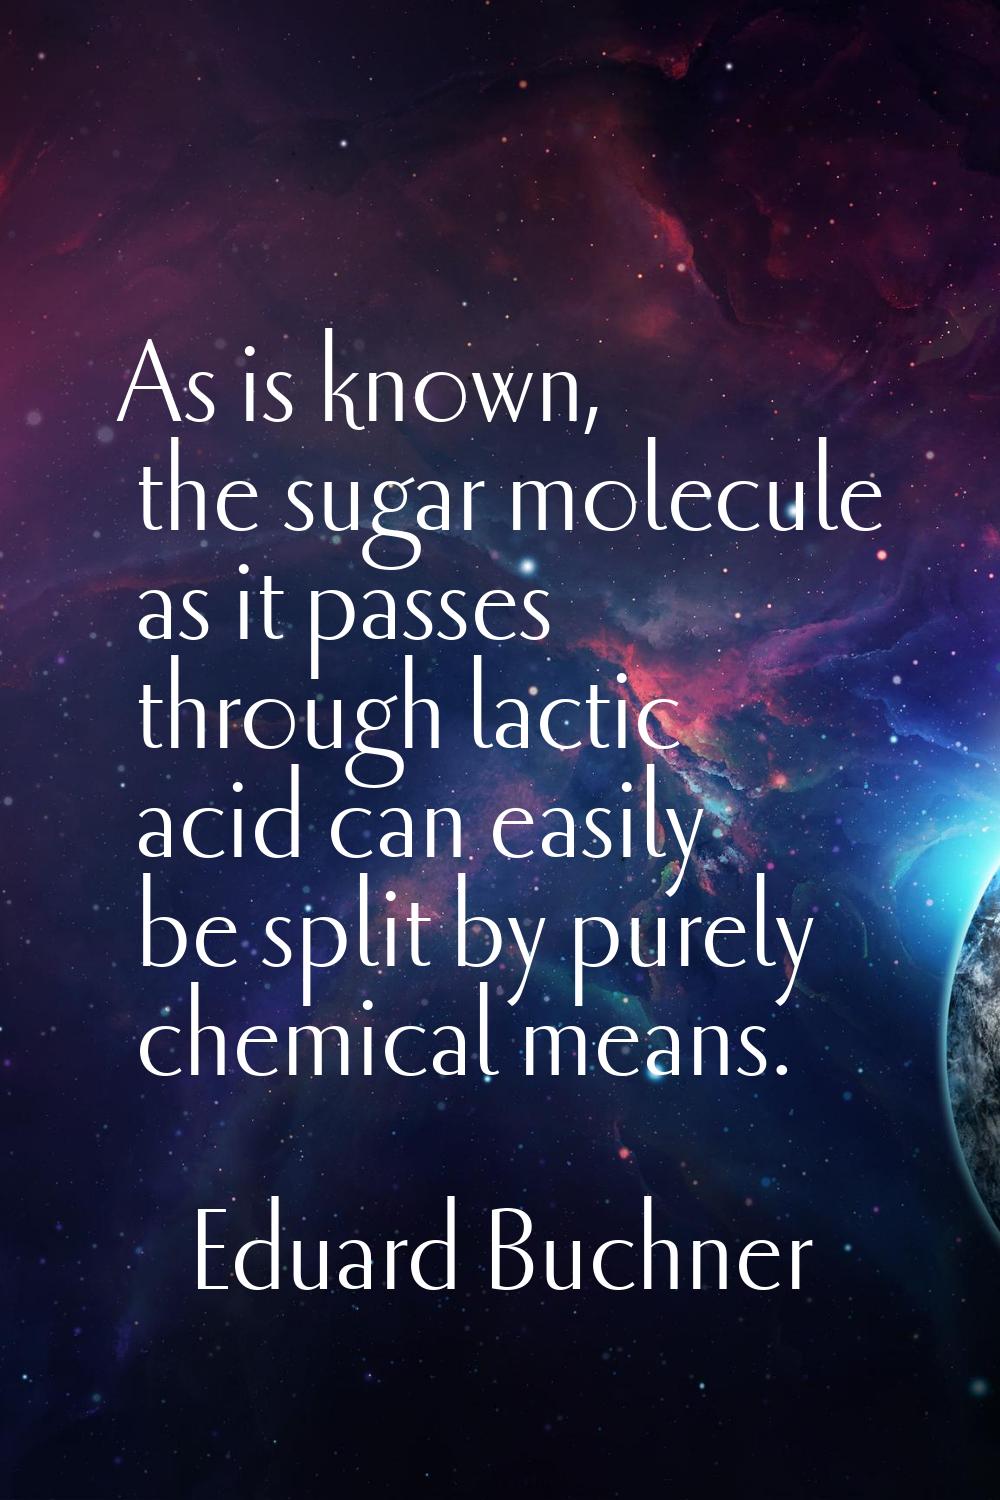 As is known, the sugar molecule as it passes through lactic acid can easily be split by purely chem